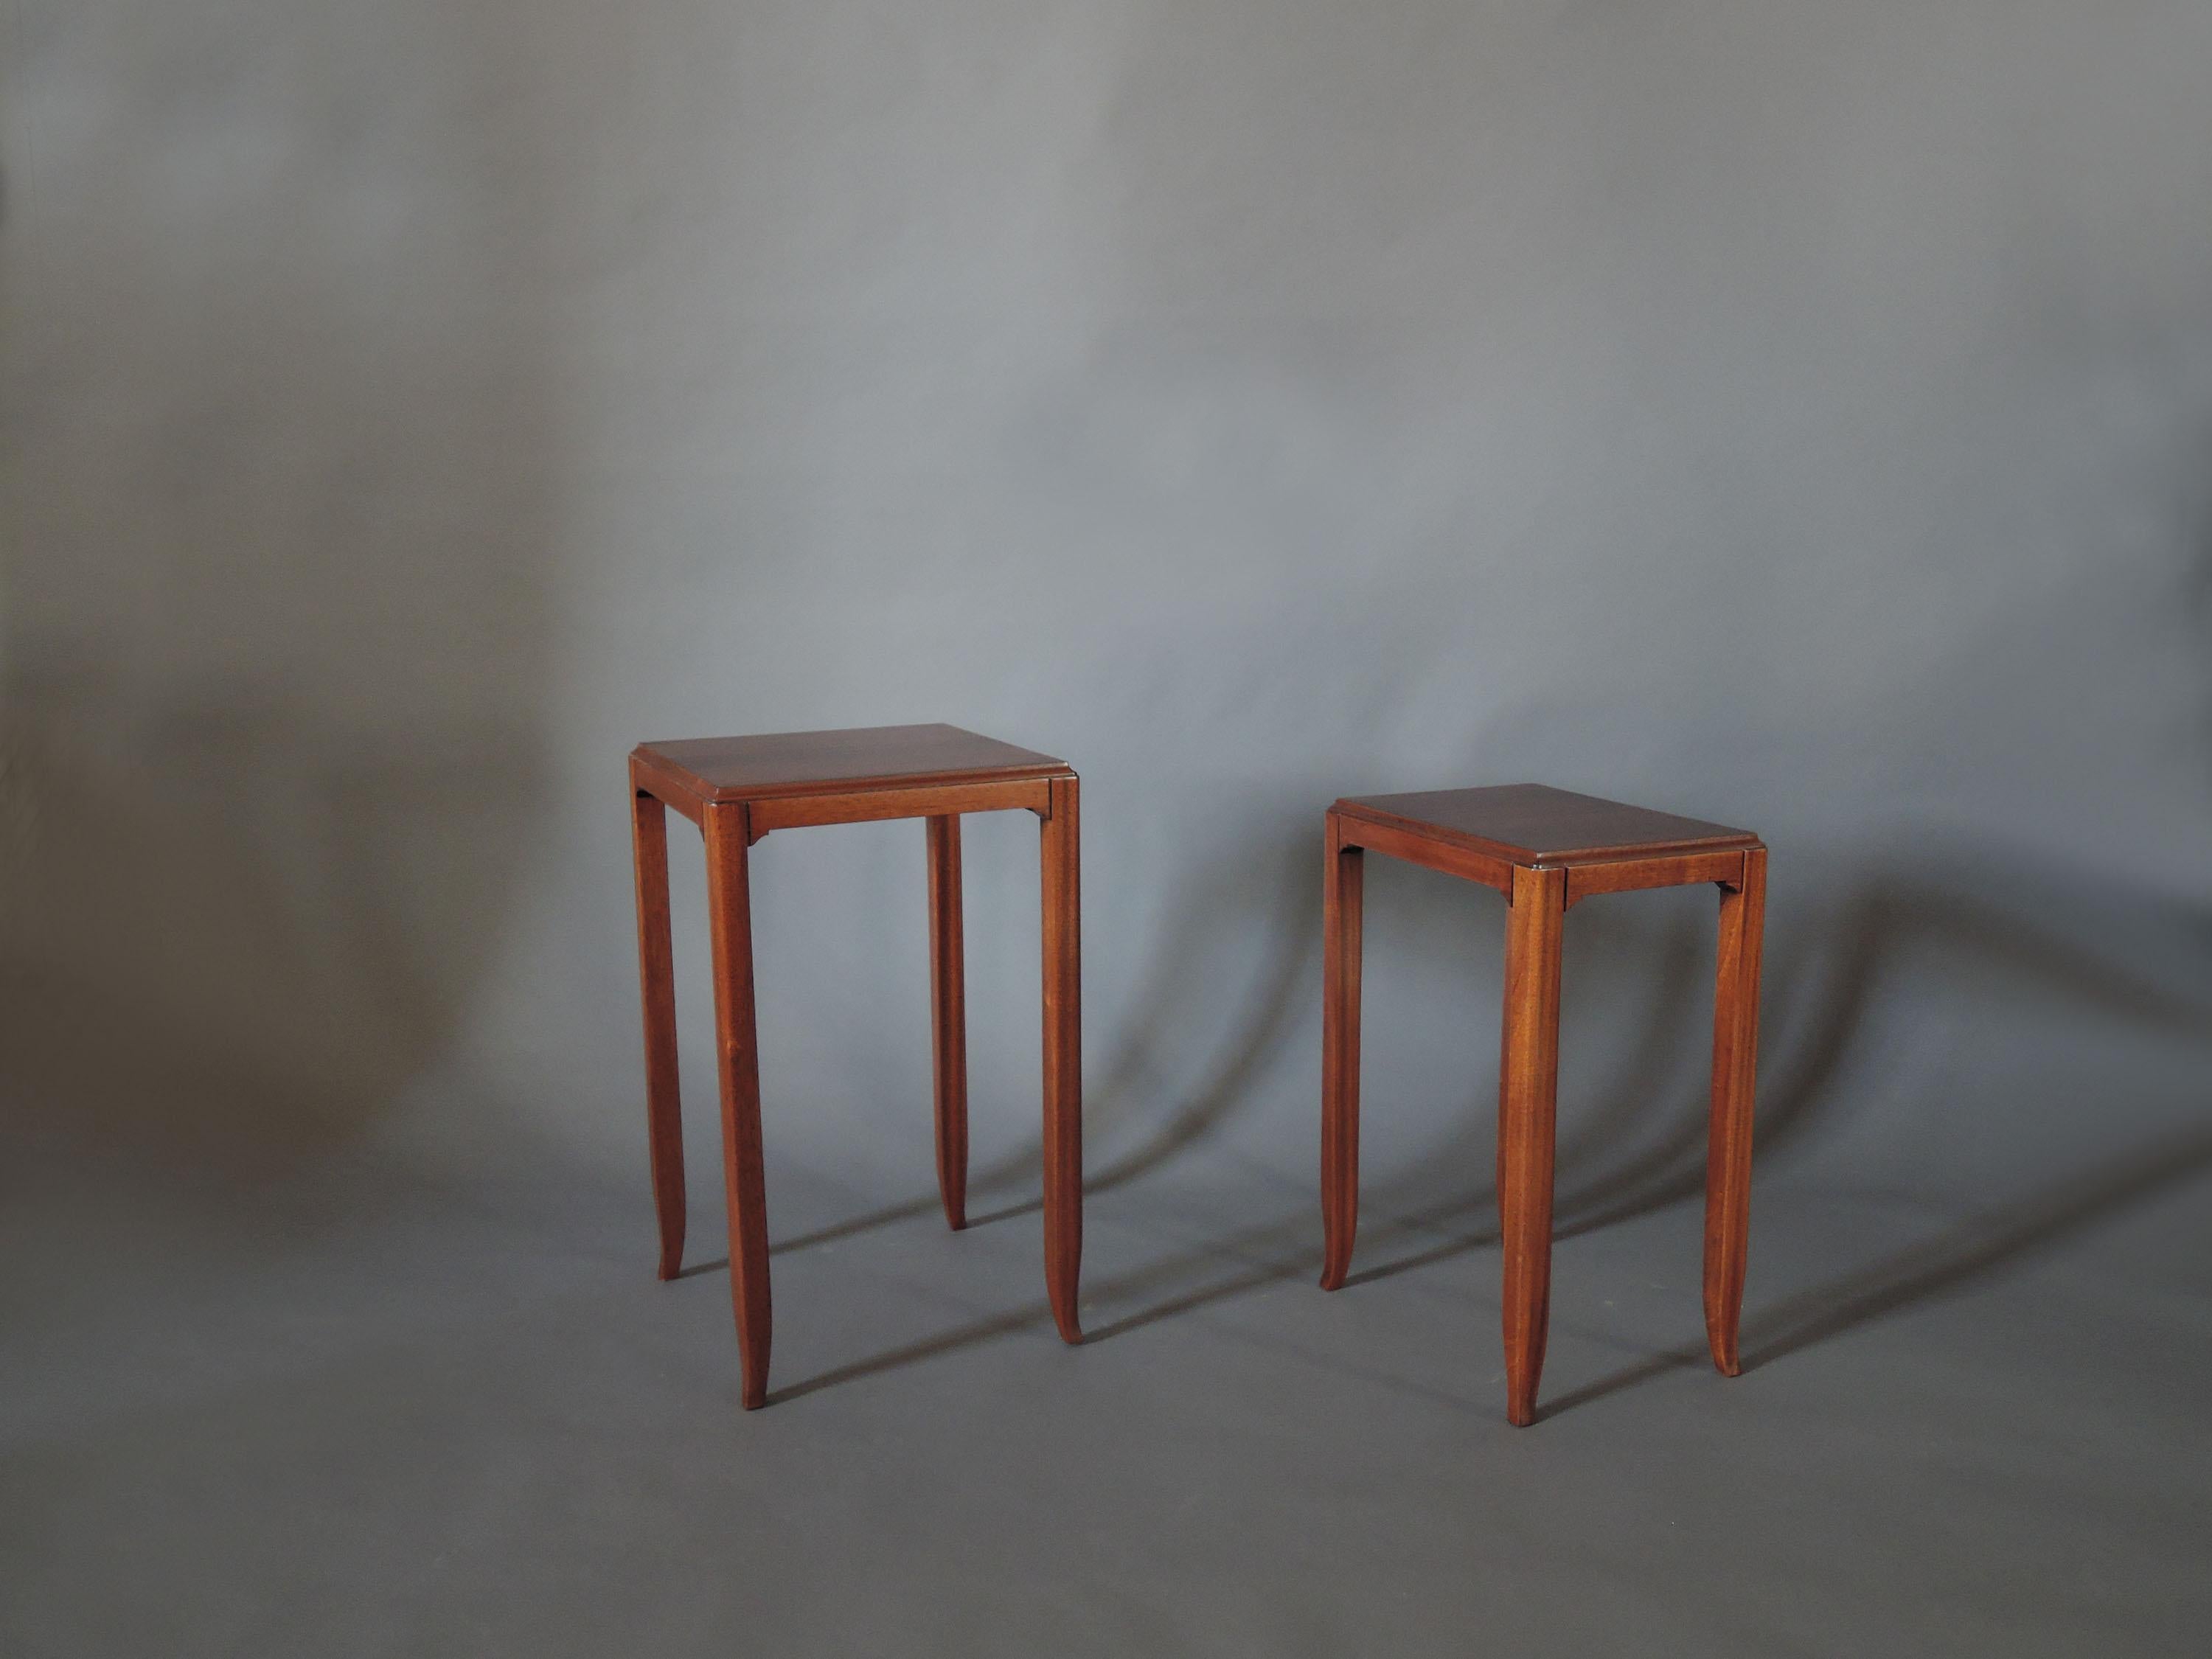 Two fine French Art Deco side tables by Jules Leleu with a solid mahogany base and a rosewood veneered top. 
Stamped.

Dimensions:
Bigger one is H 25